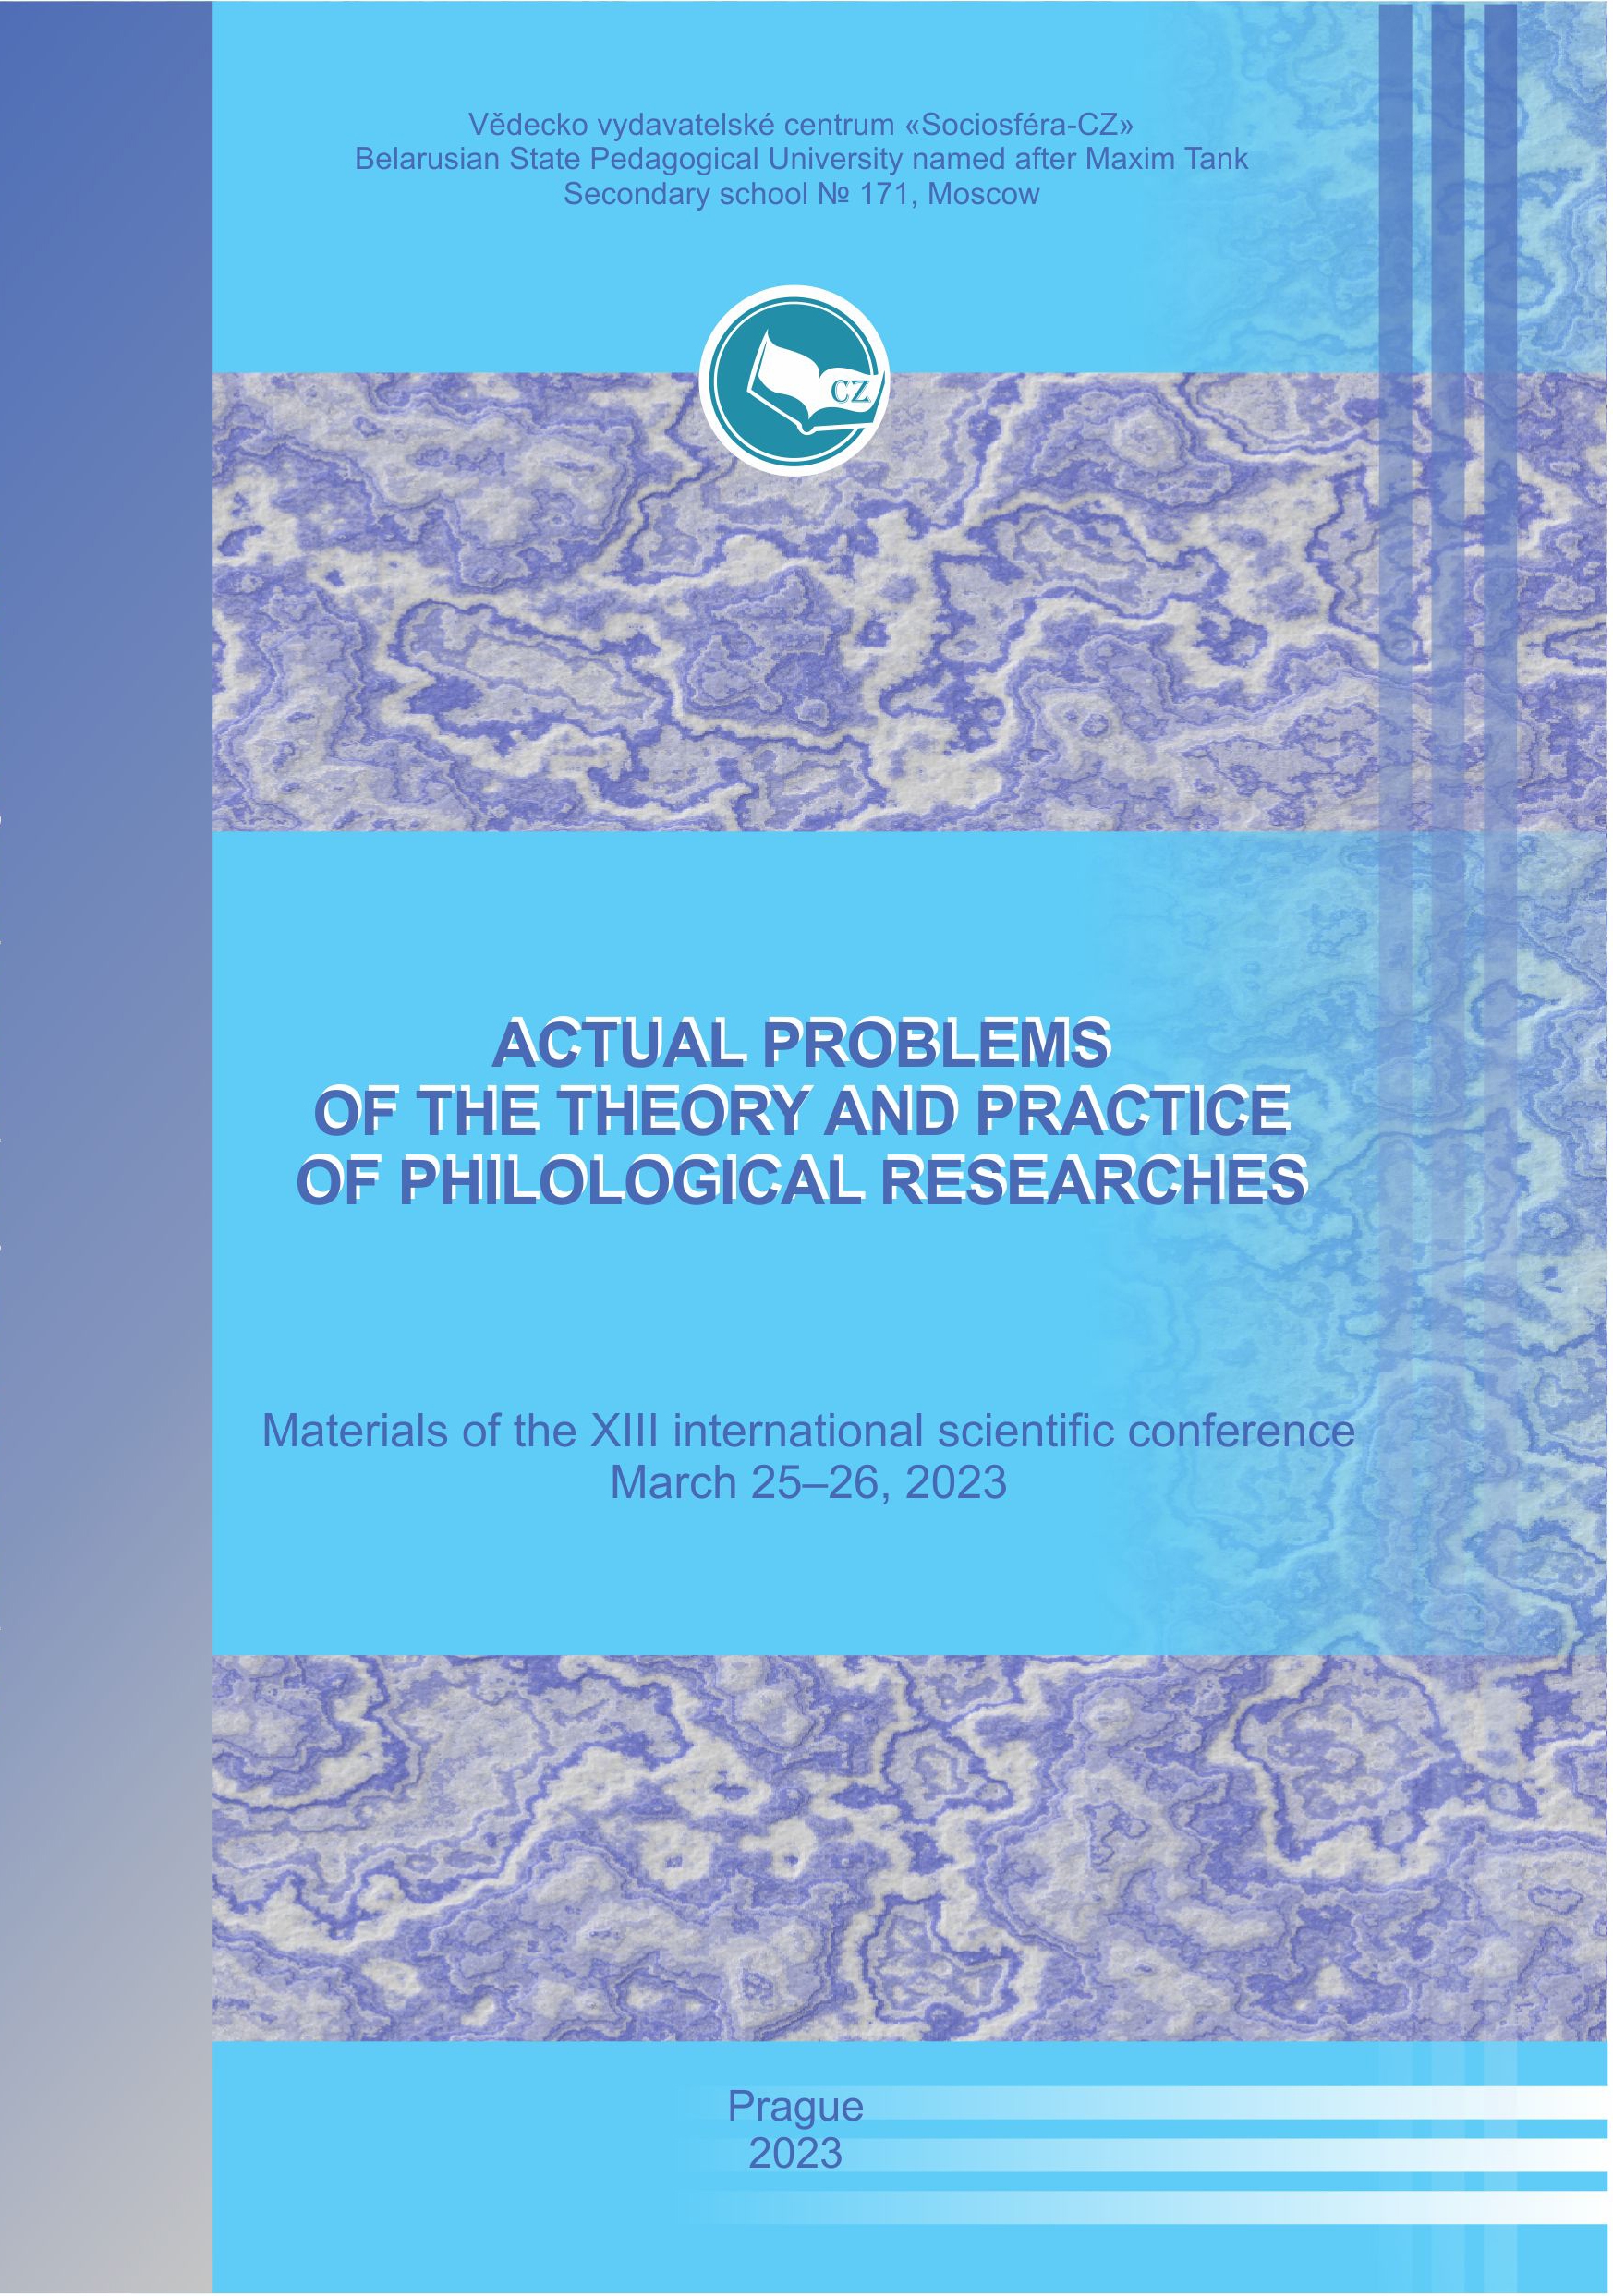 Actual problems of the theory and practice of philological researches